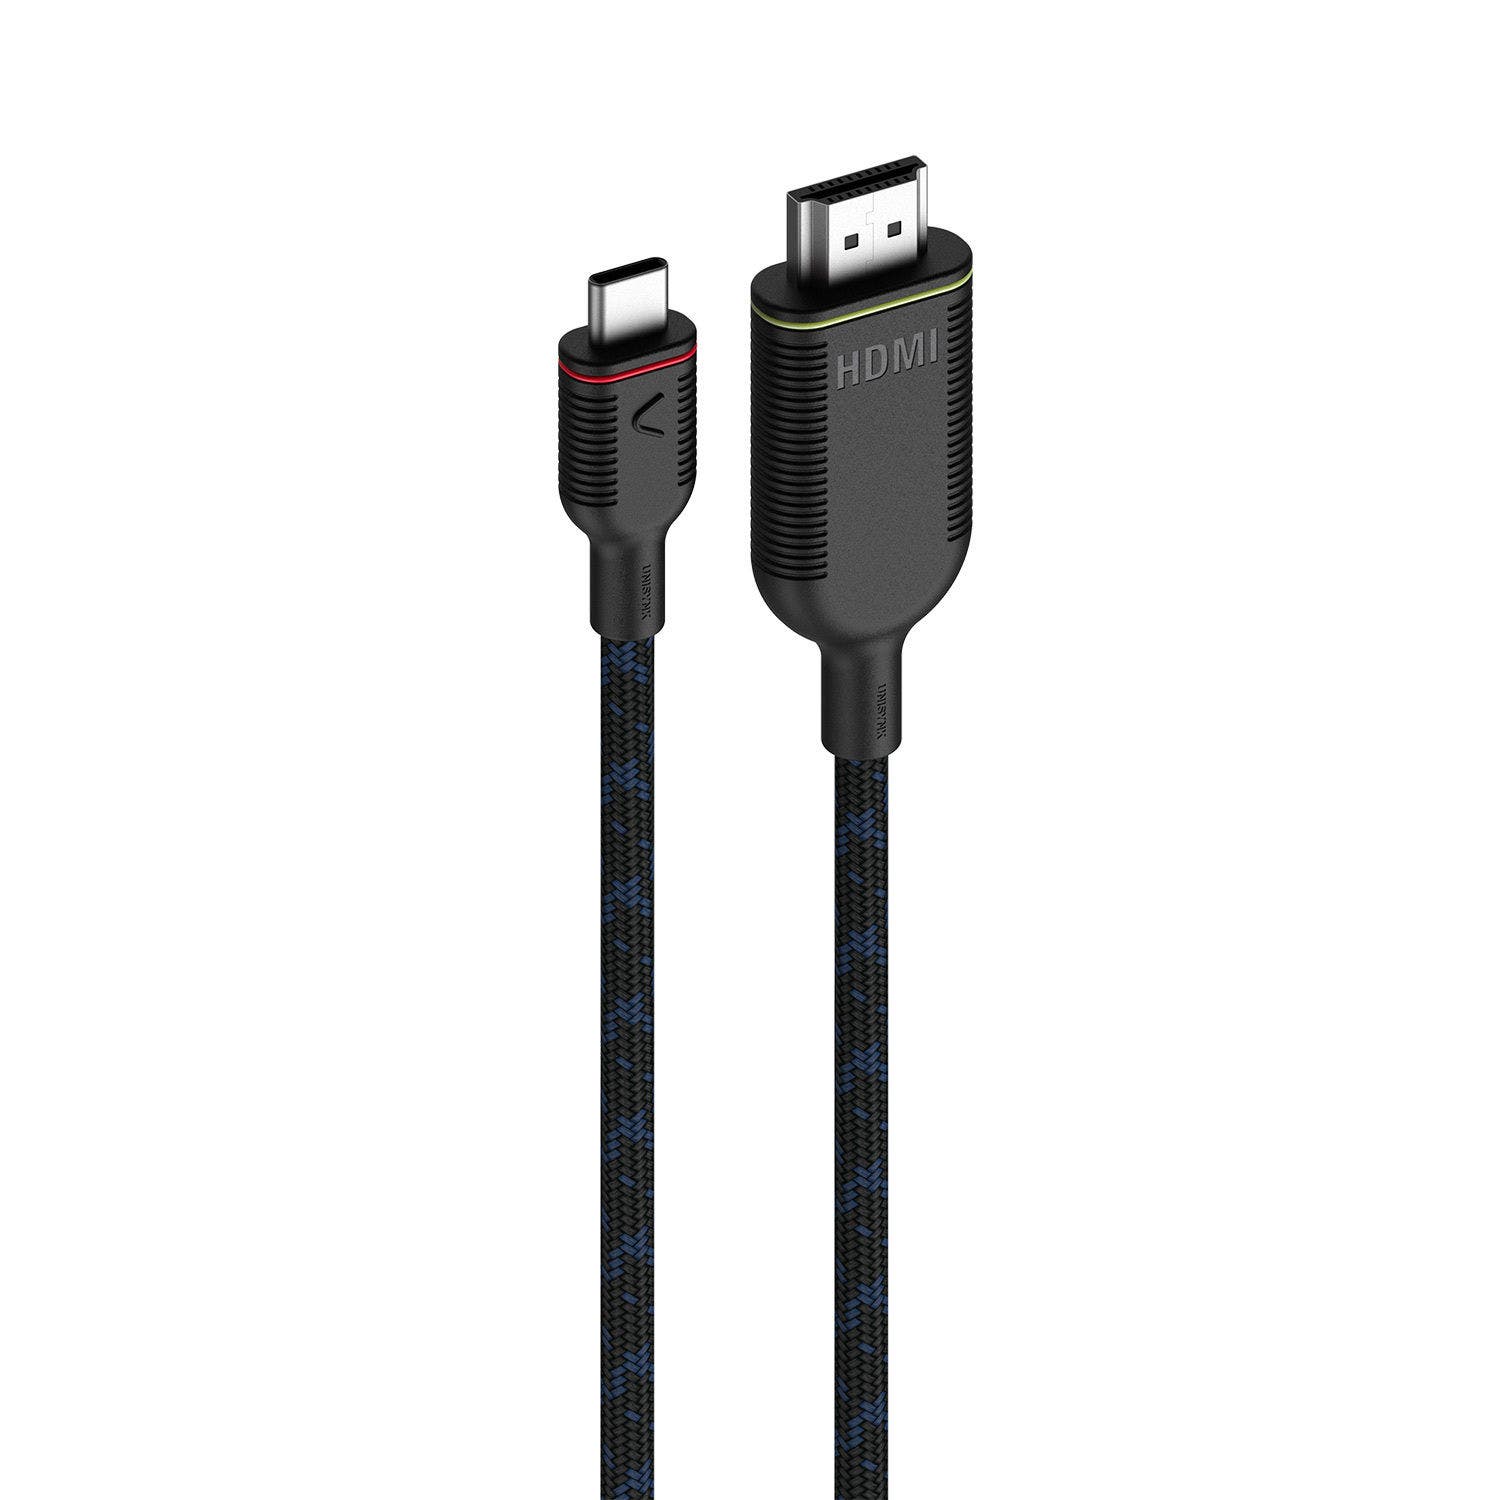 Unisynk USB C TO HDMI 4K, Black, 1.5M Cable